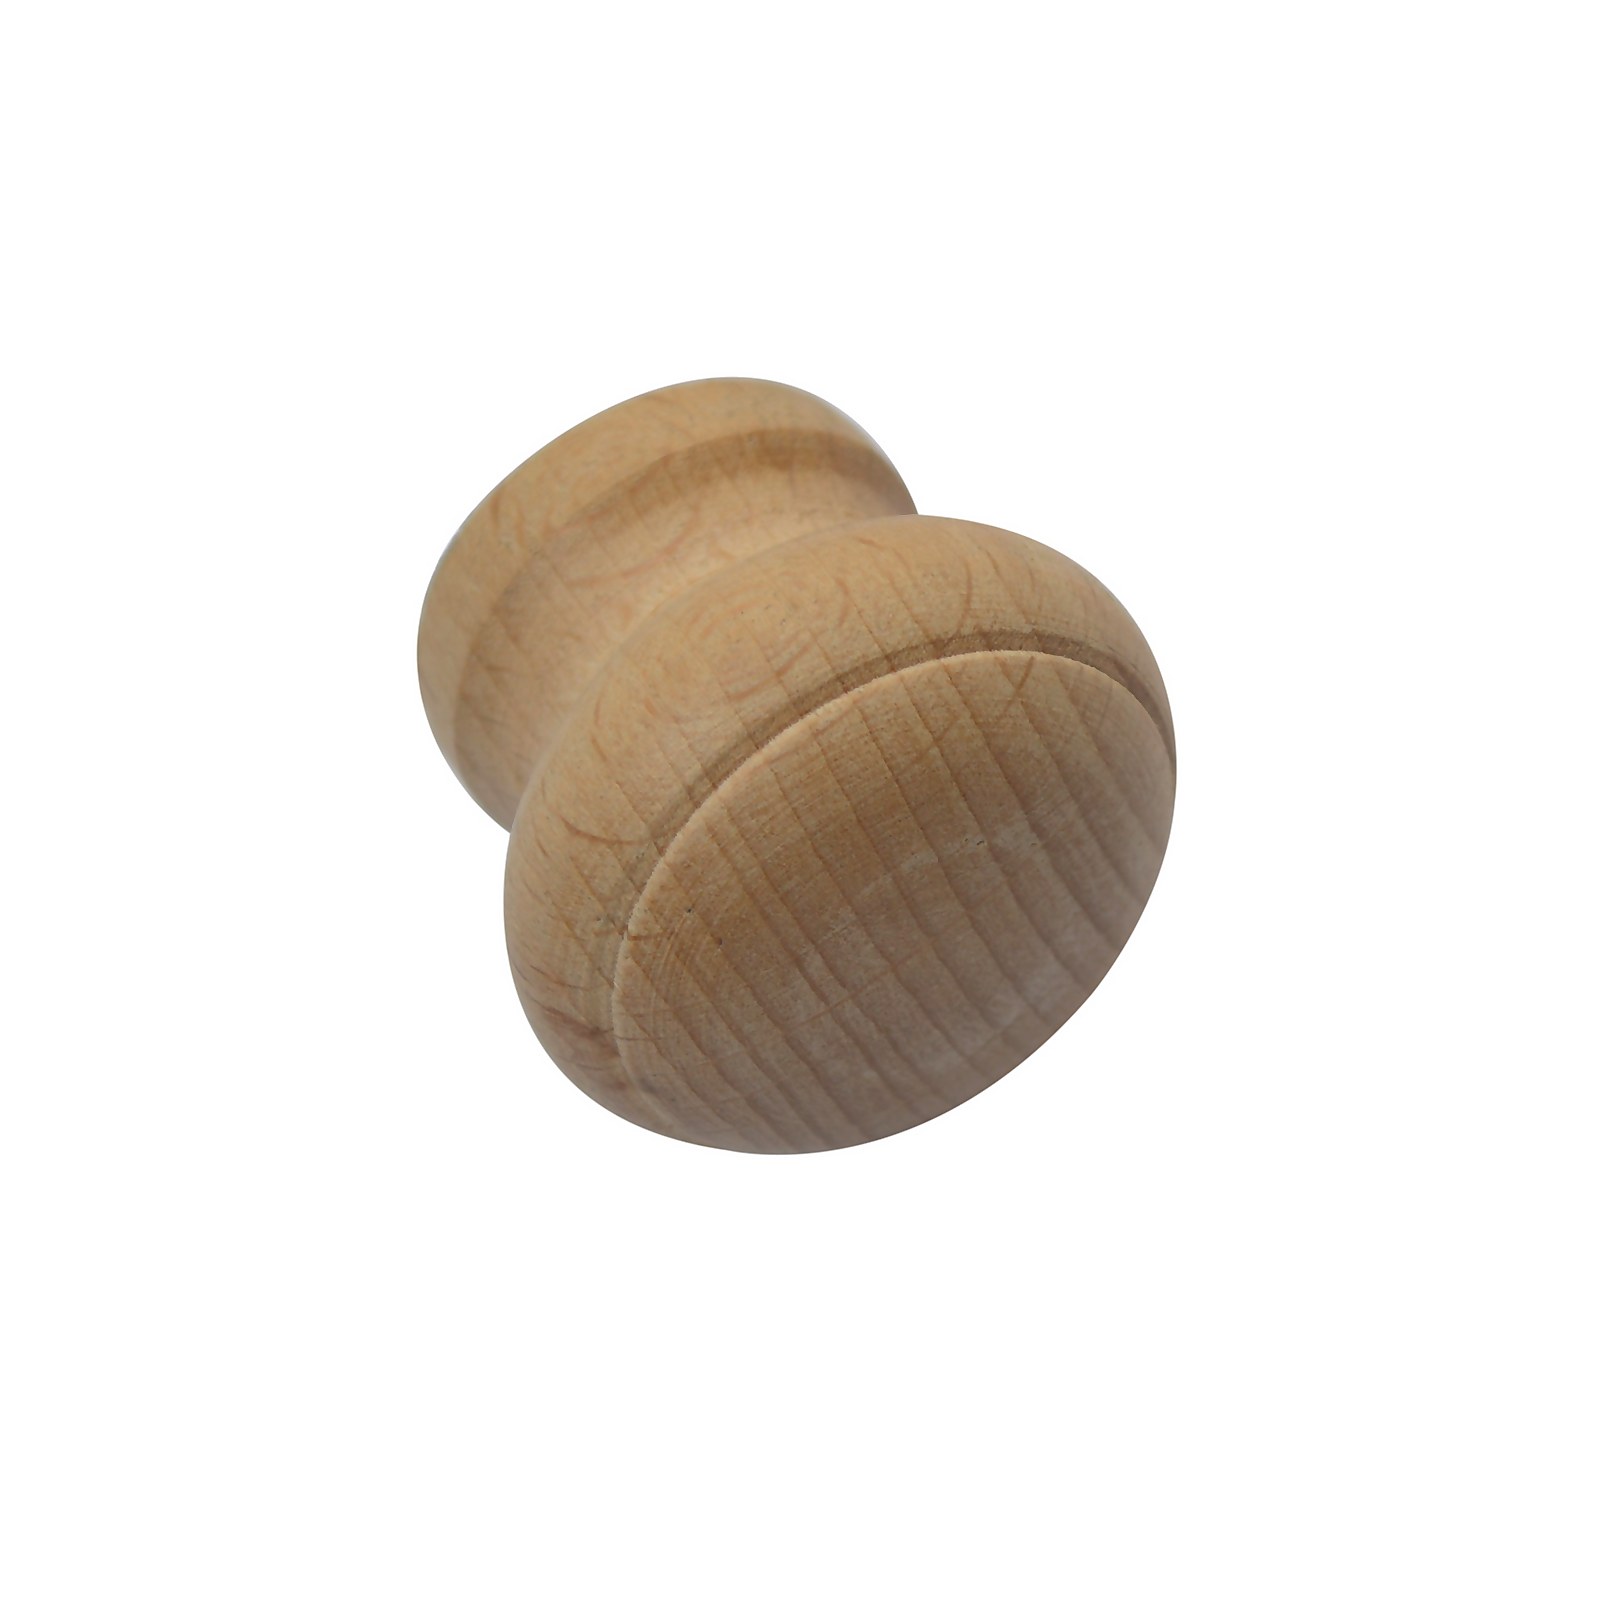 Photo of Beech 128mm Ringed Natural Wooden Cabinet Knob - 2 Pack